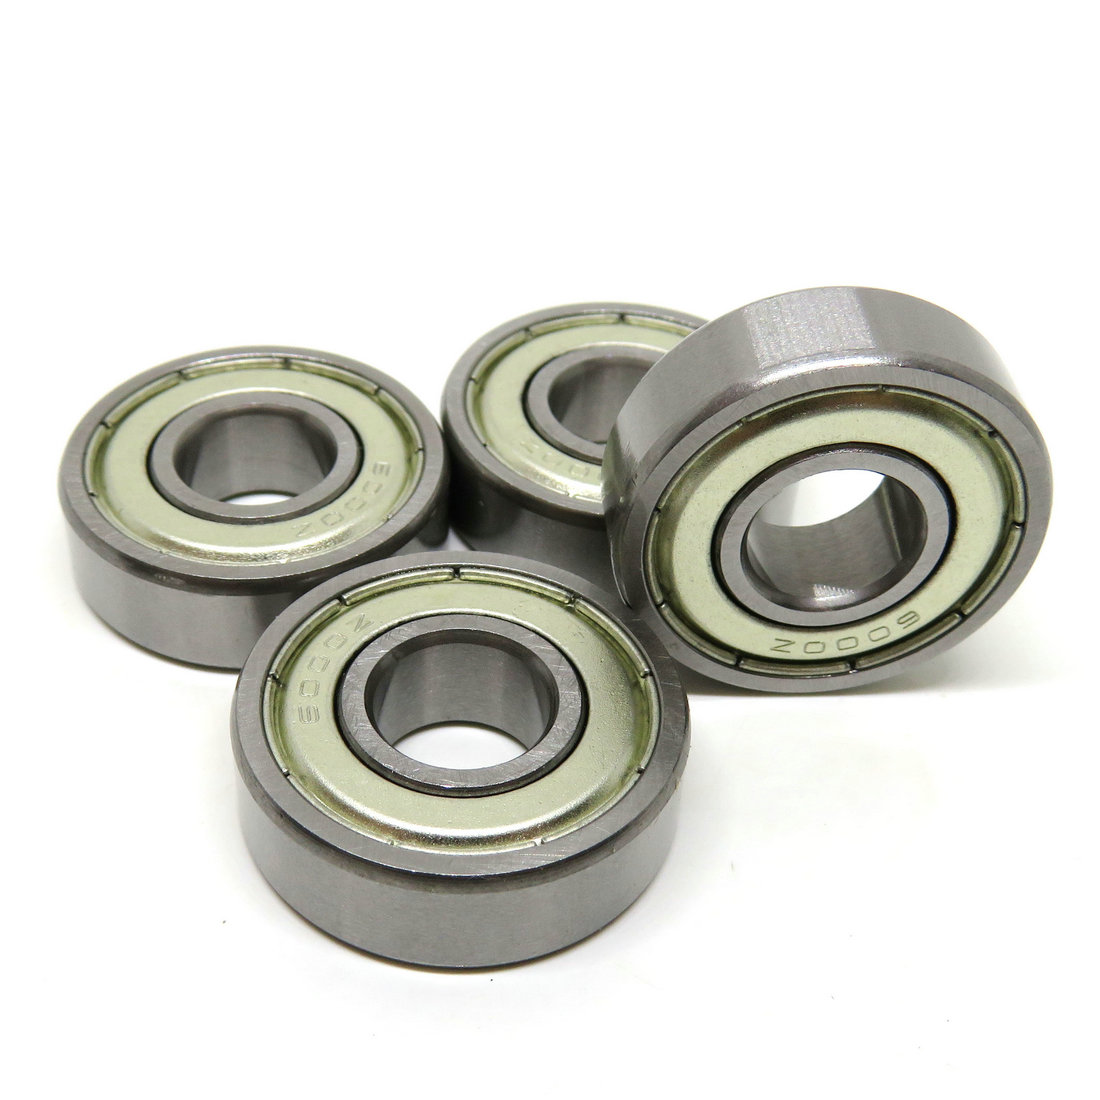 6001ZZ Double Metal Sealed Deep Groove Ball Bearings 12x28x8mm 6001 ZZ for Electric Motor Applications.jpg